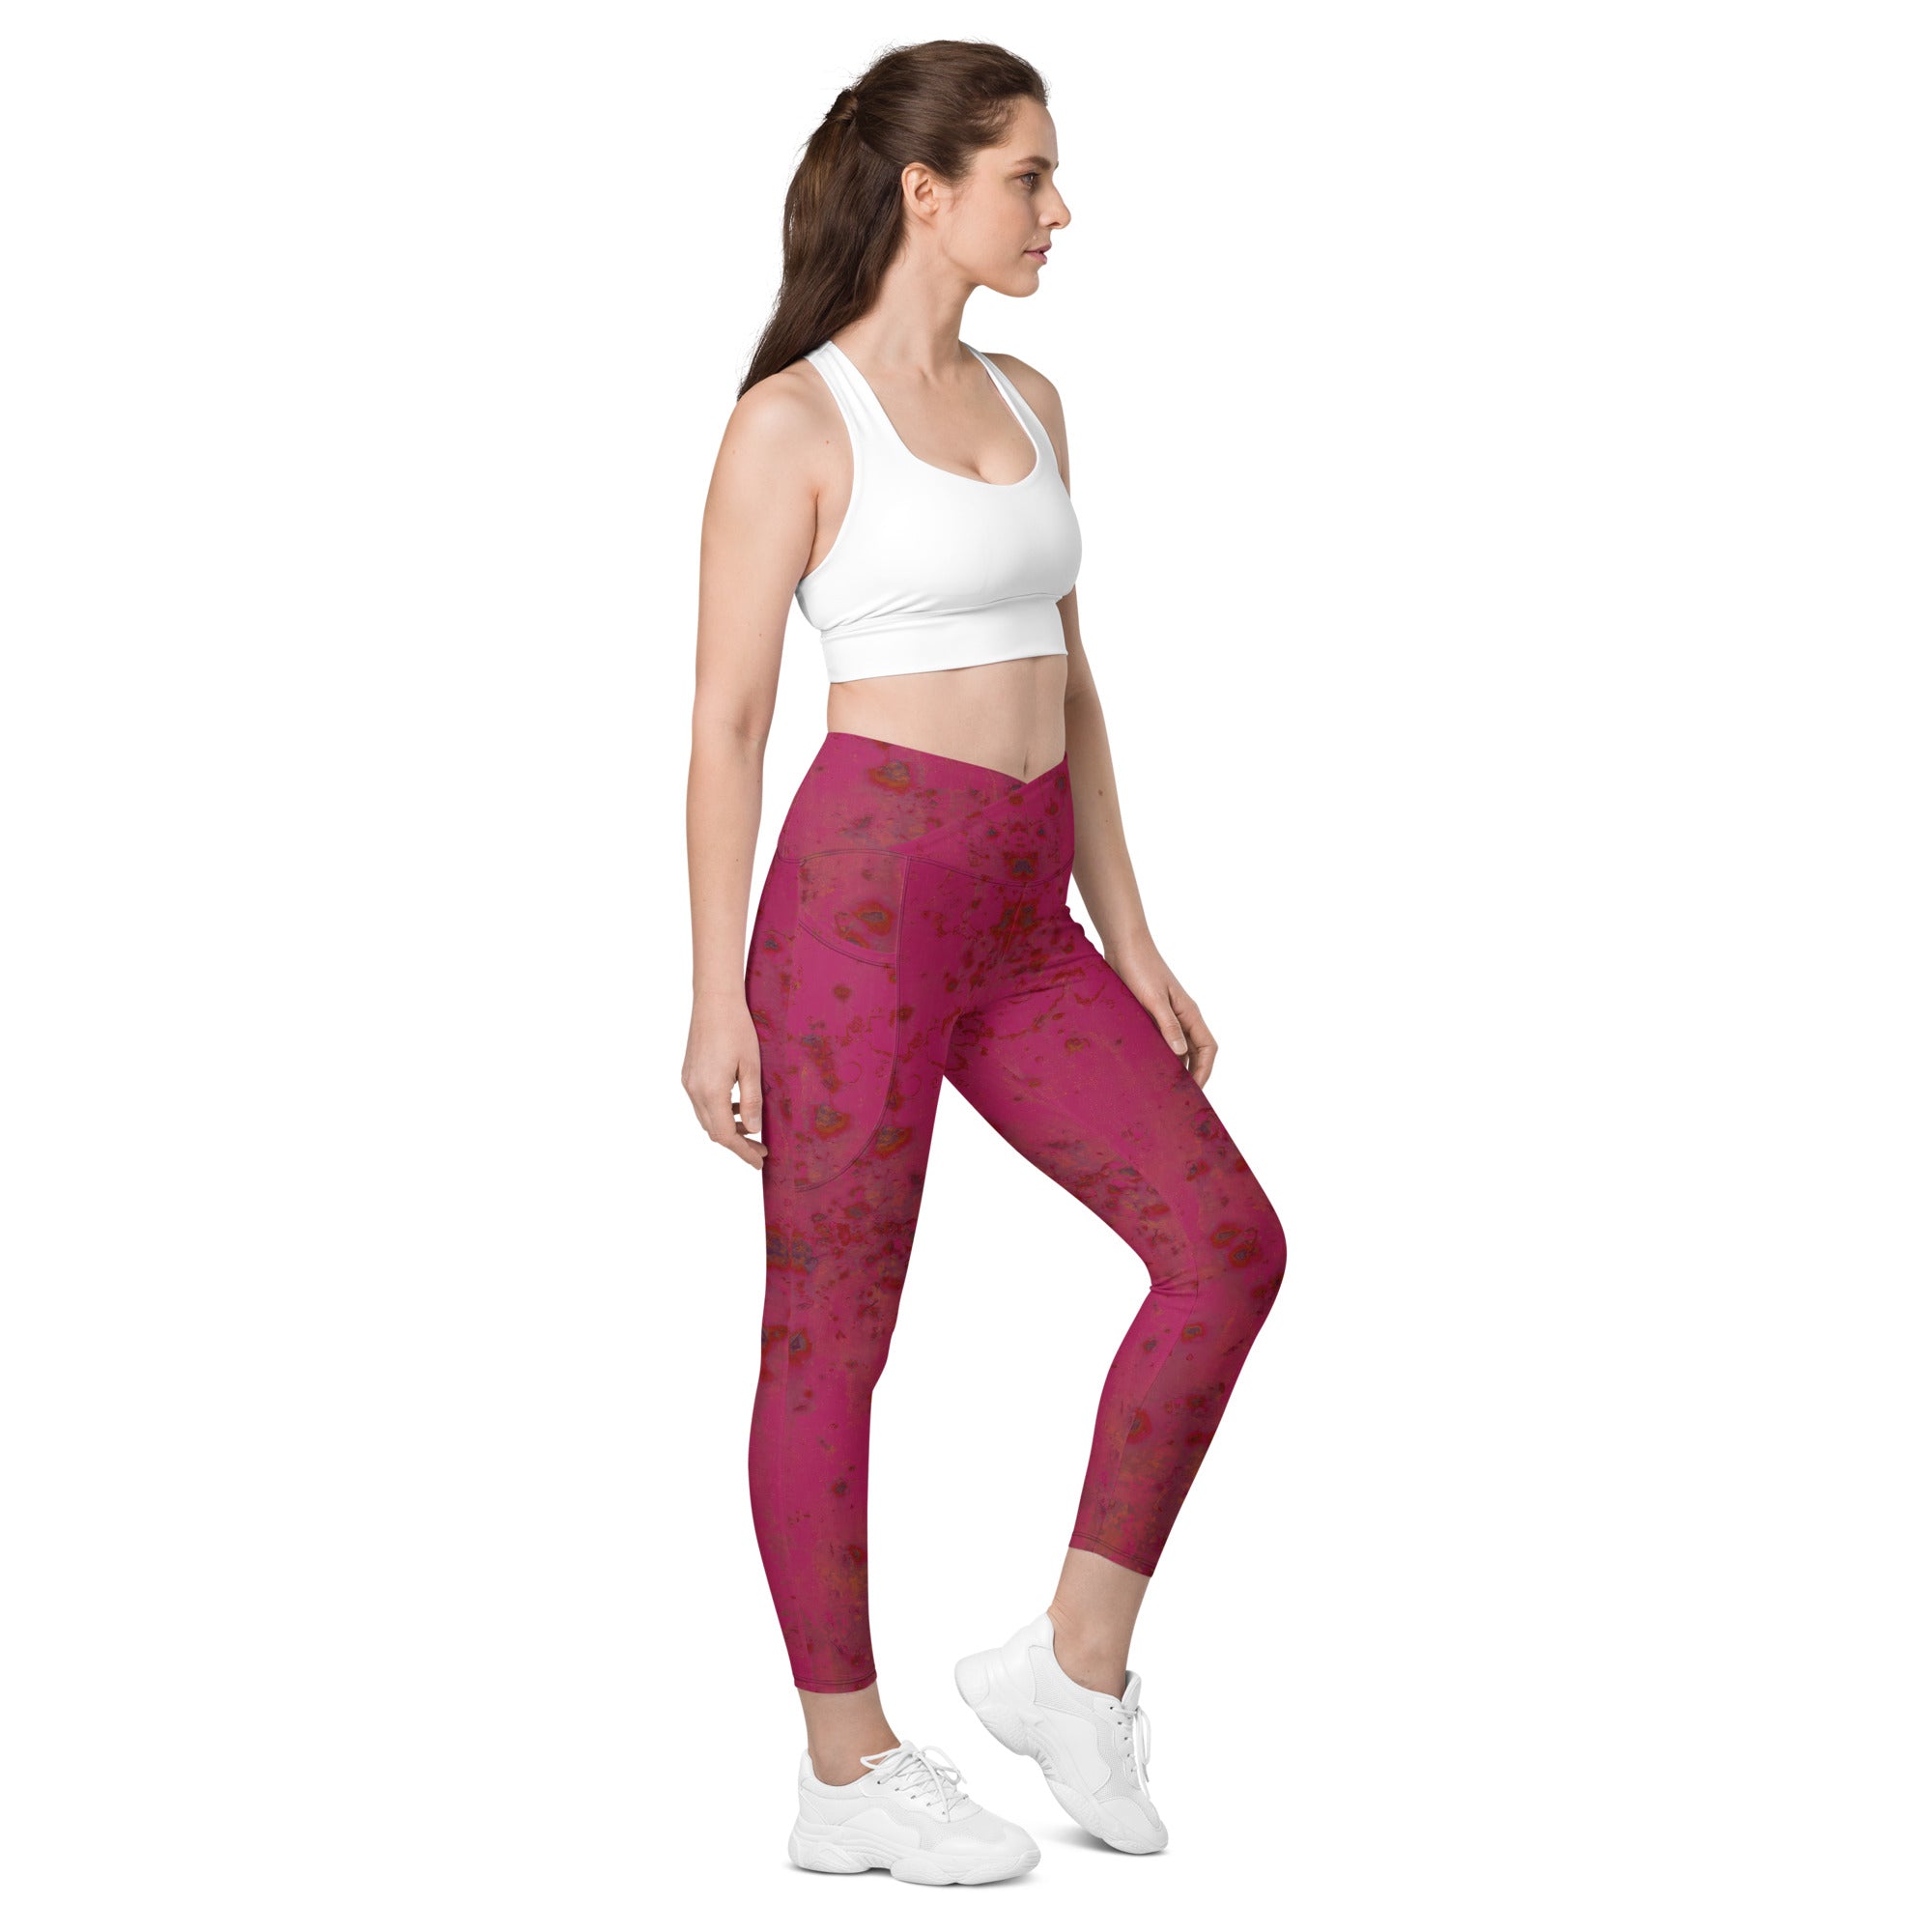 Versatile Crossover Leggings with Pockets for Everyday Use